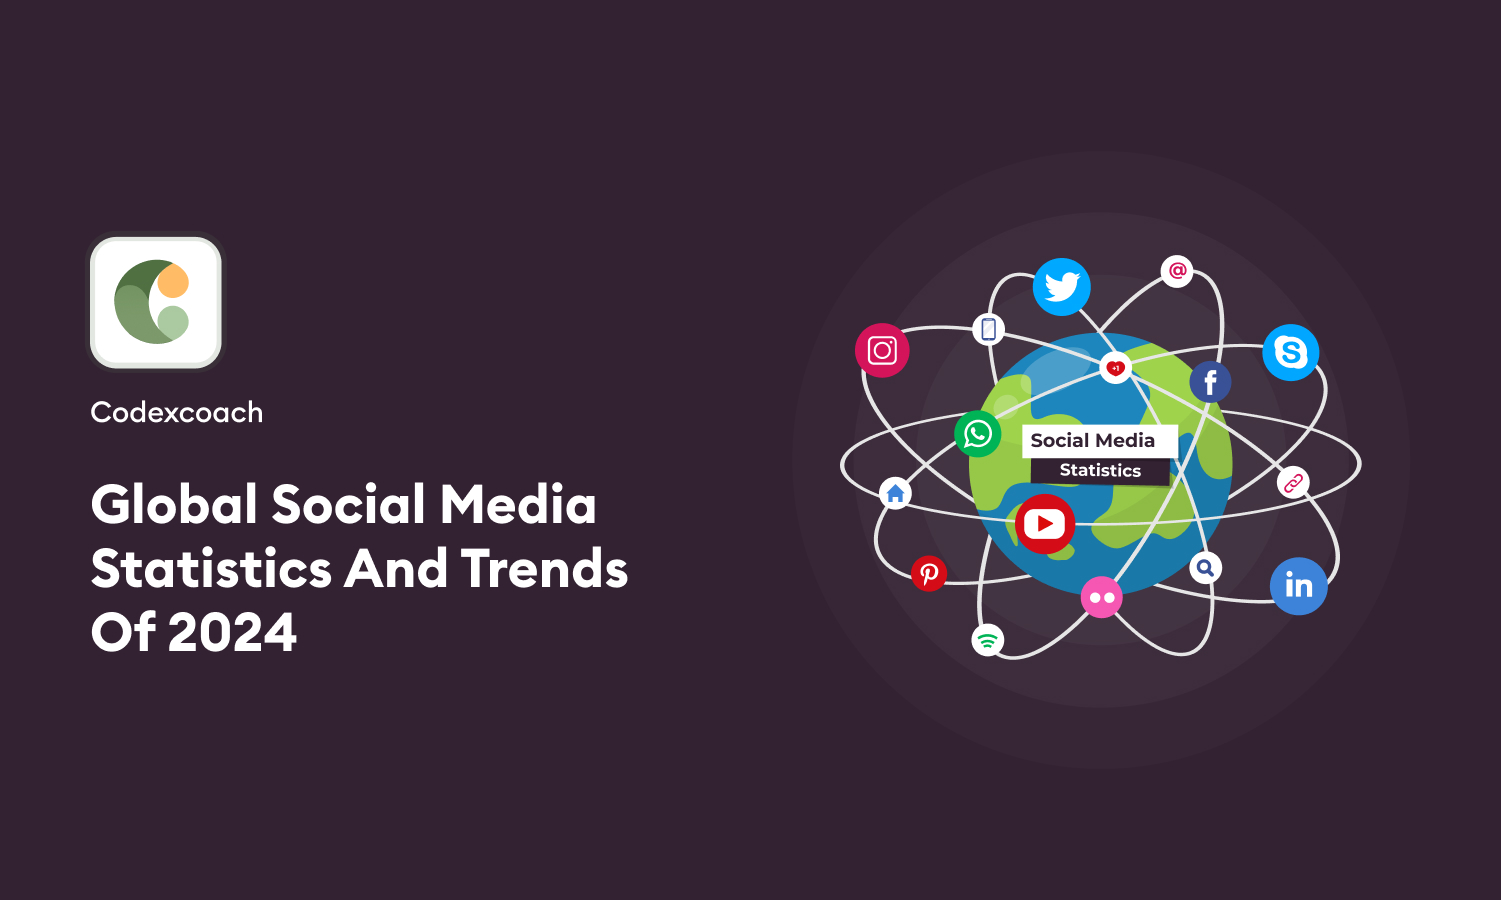 Global Social Media Statistics And Trends Of 2024